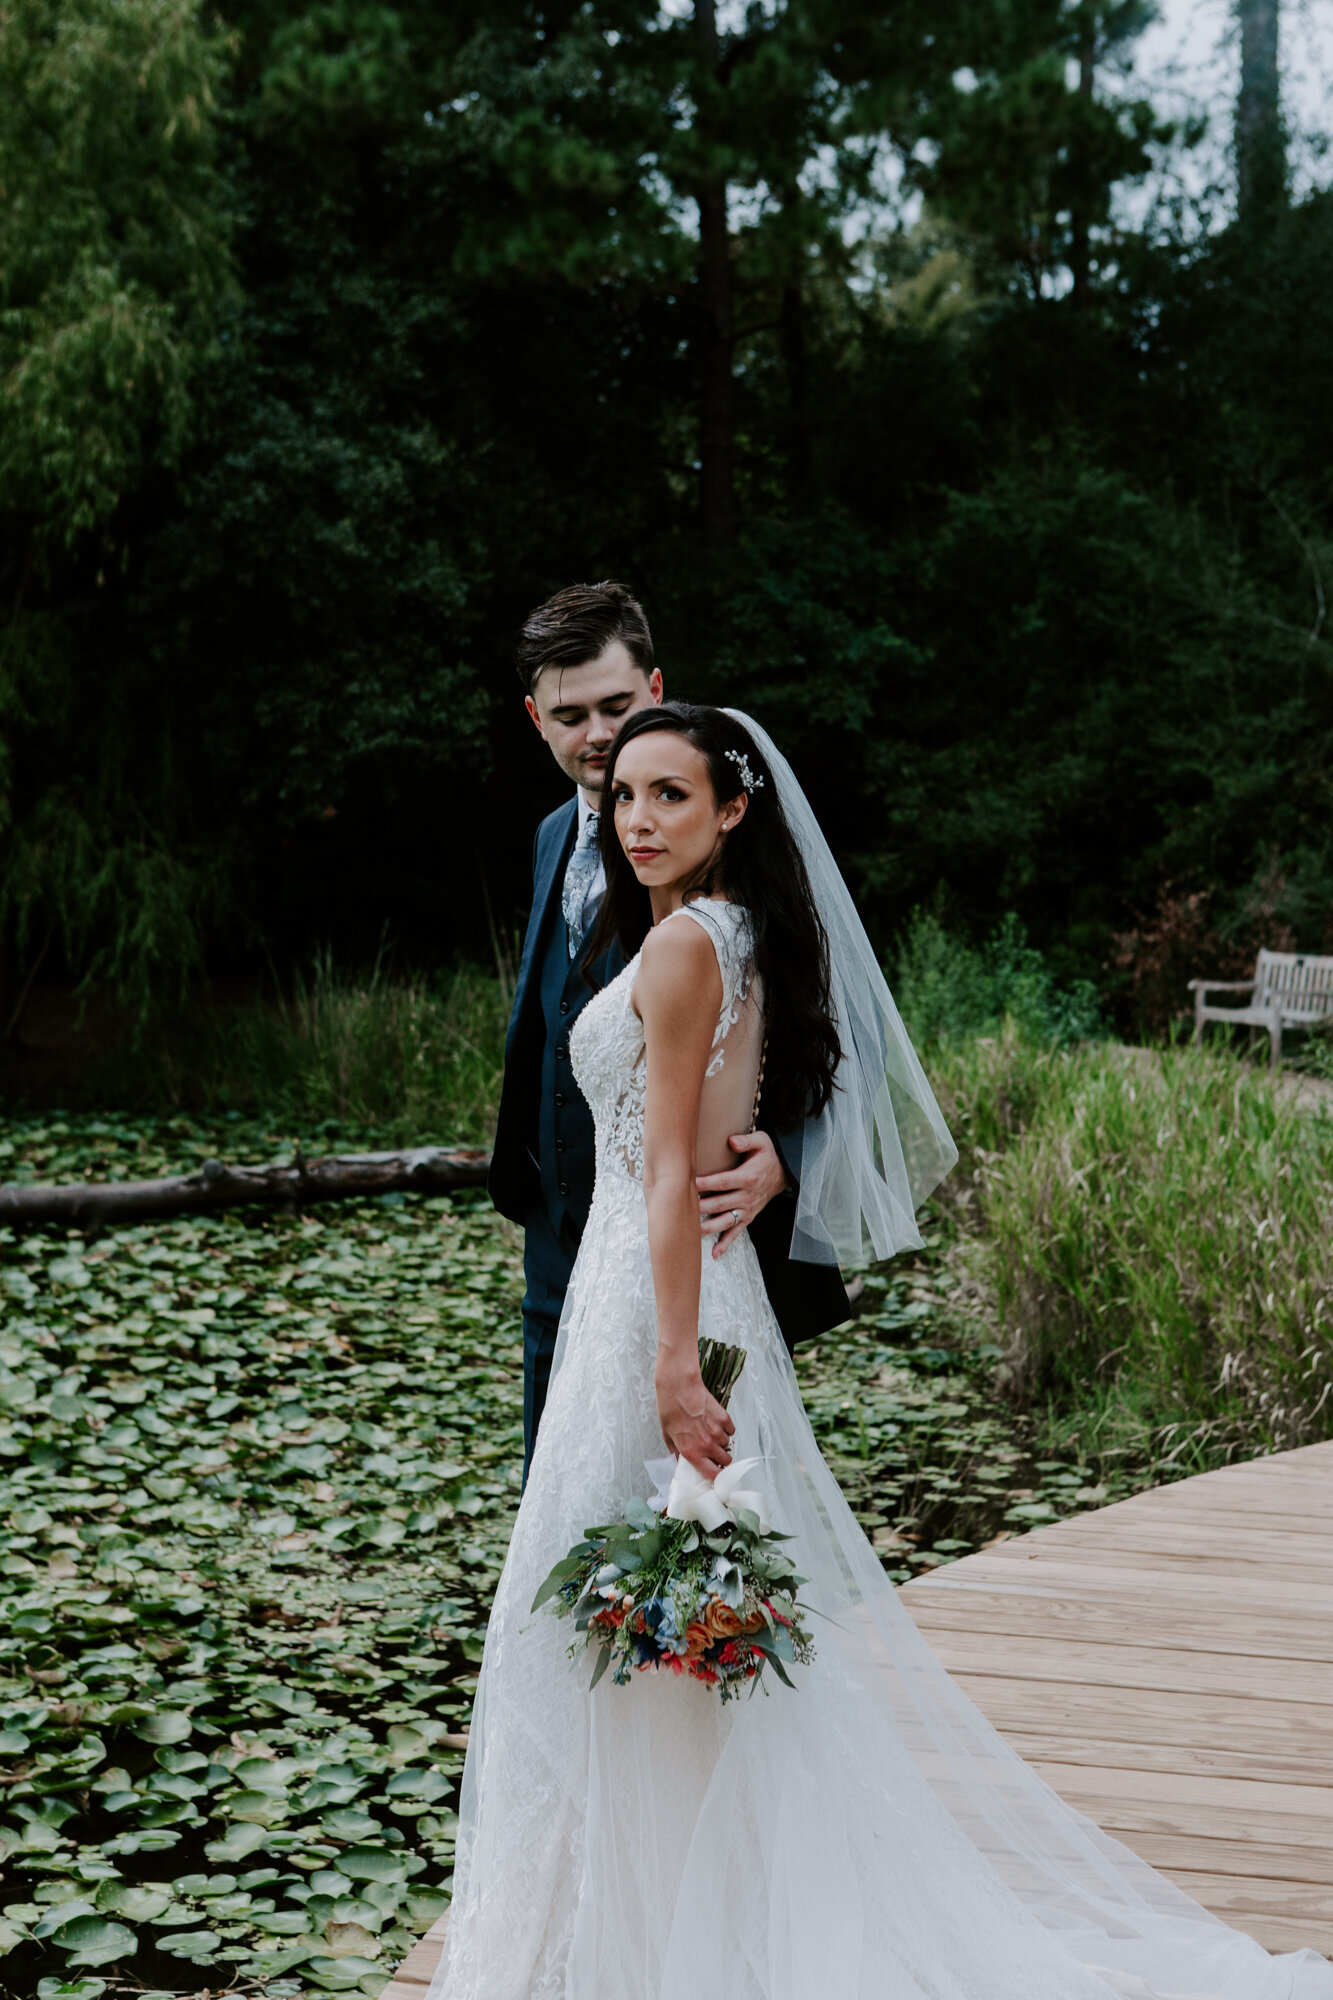 Bride and groom portraits by the pond. Vivacious Wedding at Houston Arboretum and Nature Center